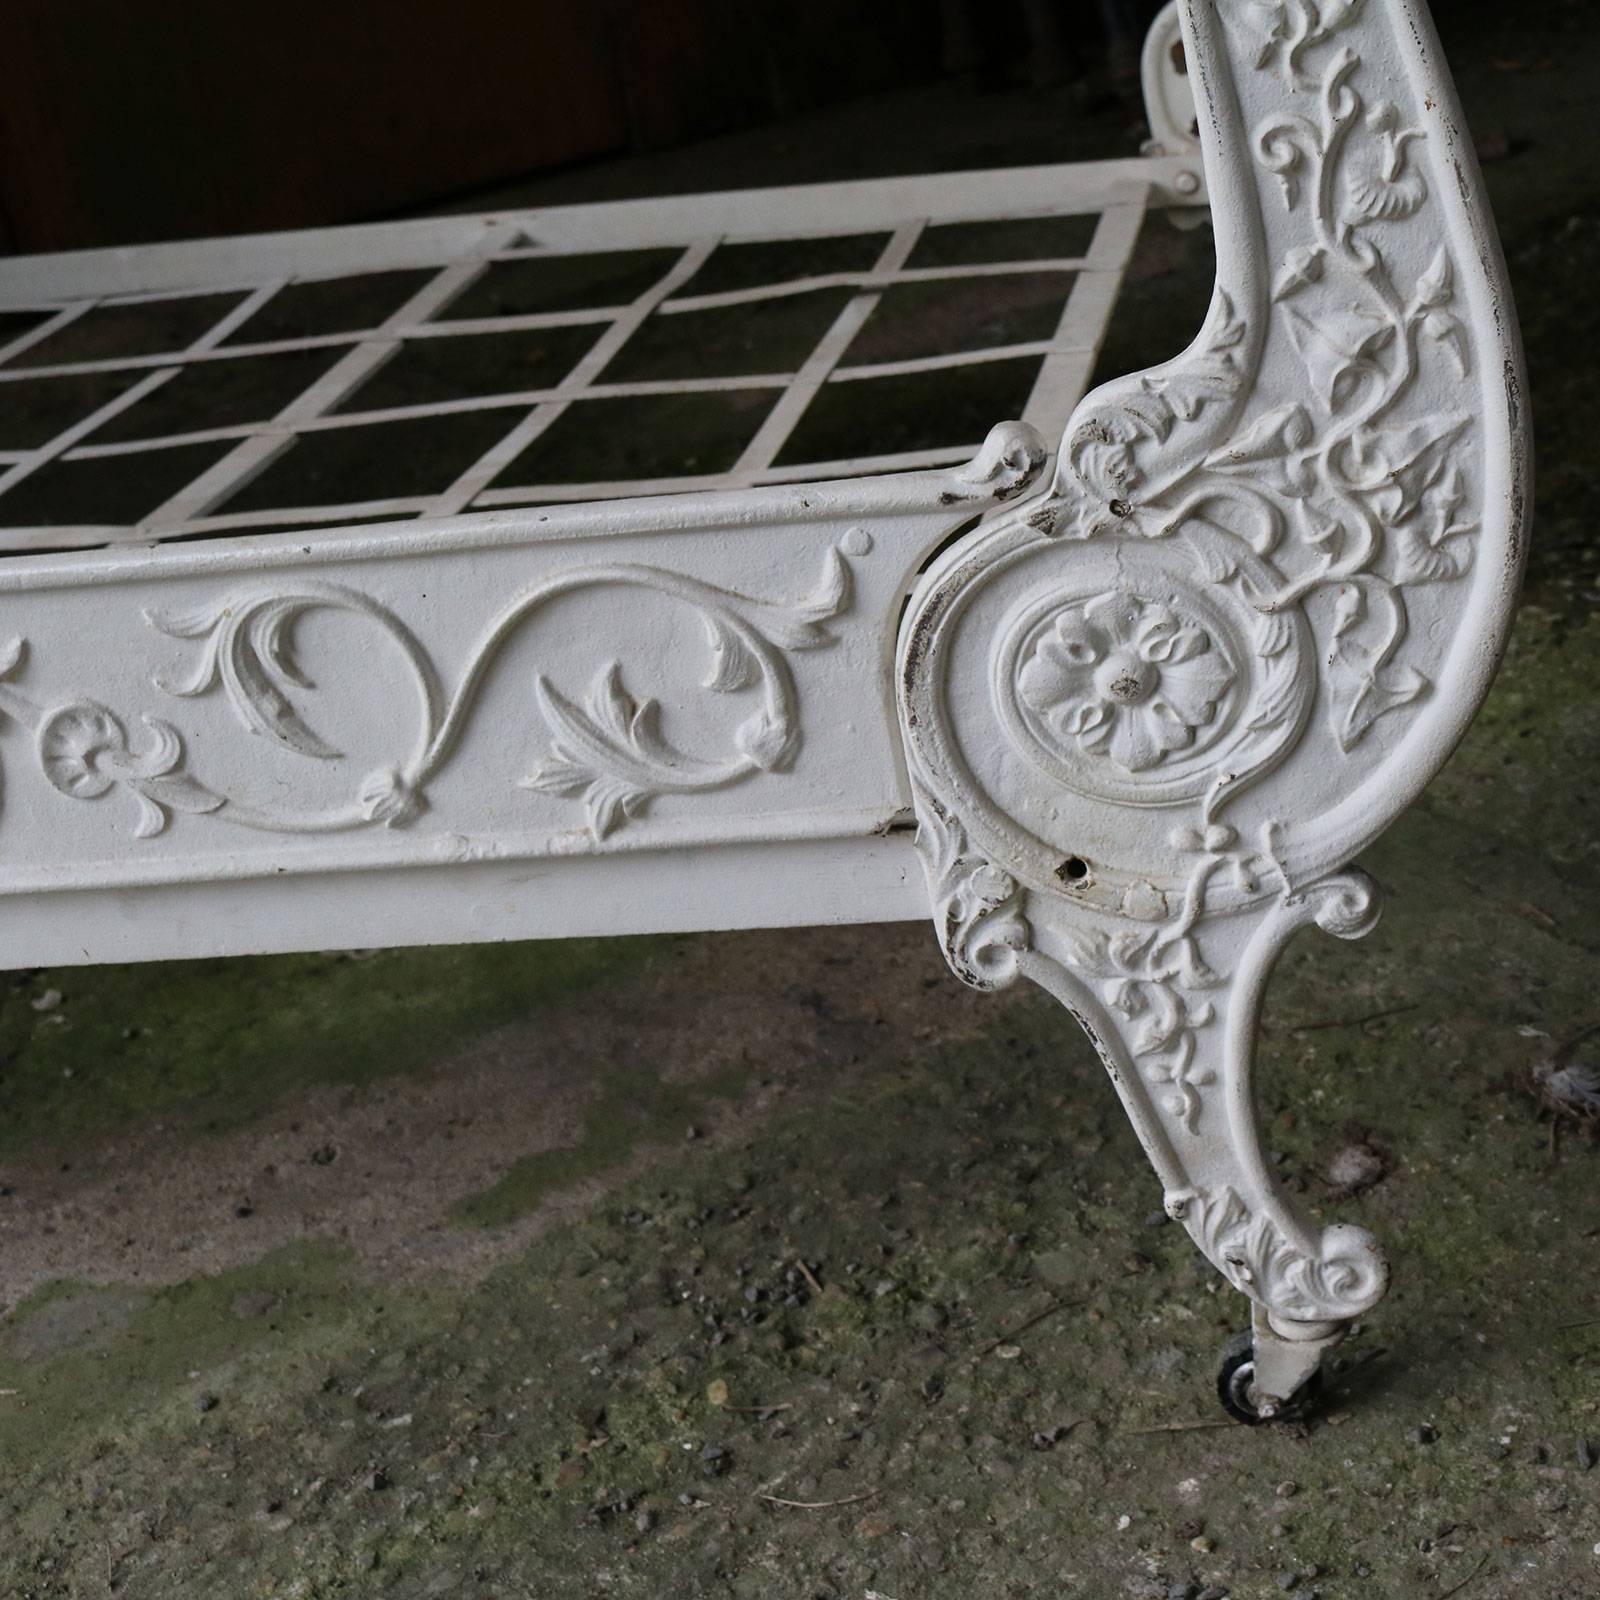 A superb cast iron daybed with roule-shaped ends and cast front panel.

This daybed accepts a 41 x 72 inch mattress, which can be supplied by us. The price is for the bed frame alone. The base, mattress, bedding and linen are extra. 